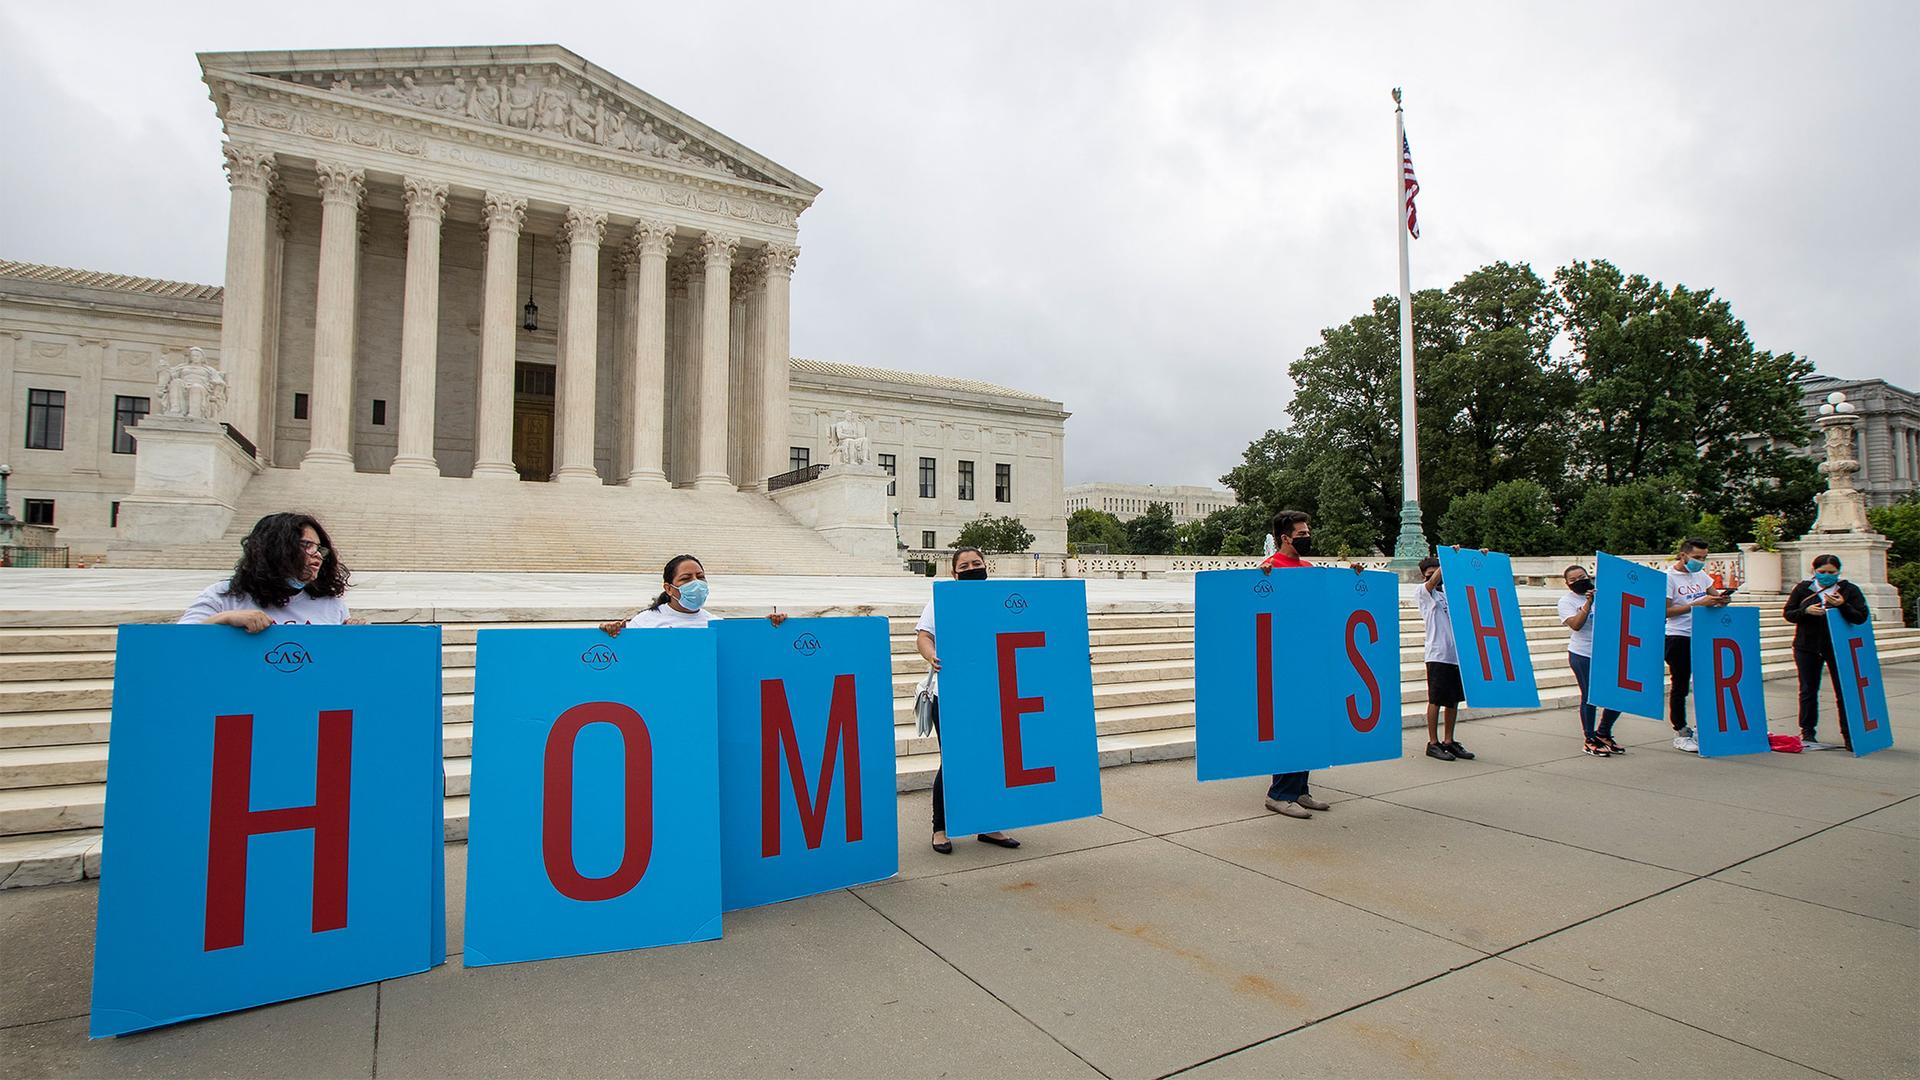 Students stand in a line in front of the US Supreme Court with signs that read "Home is here"